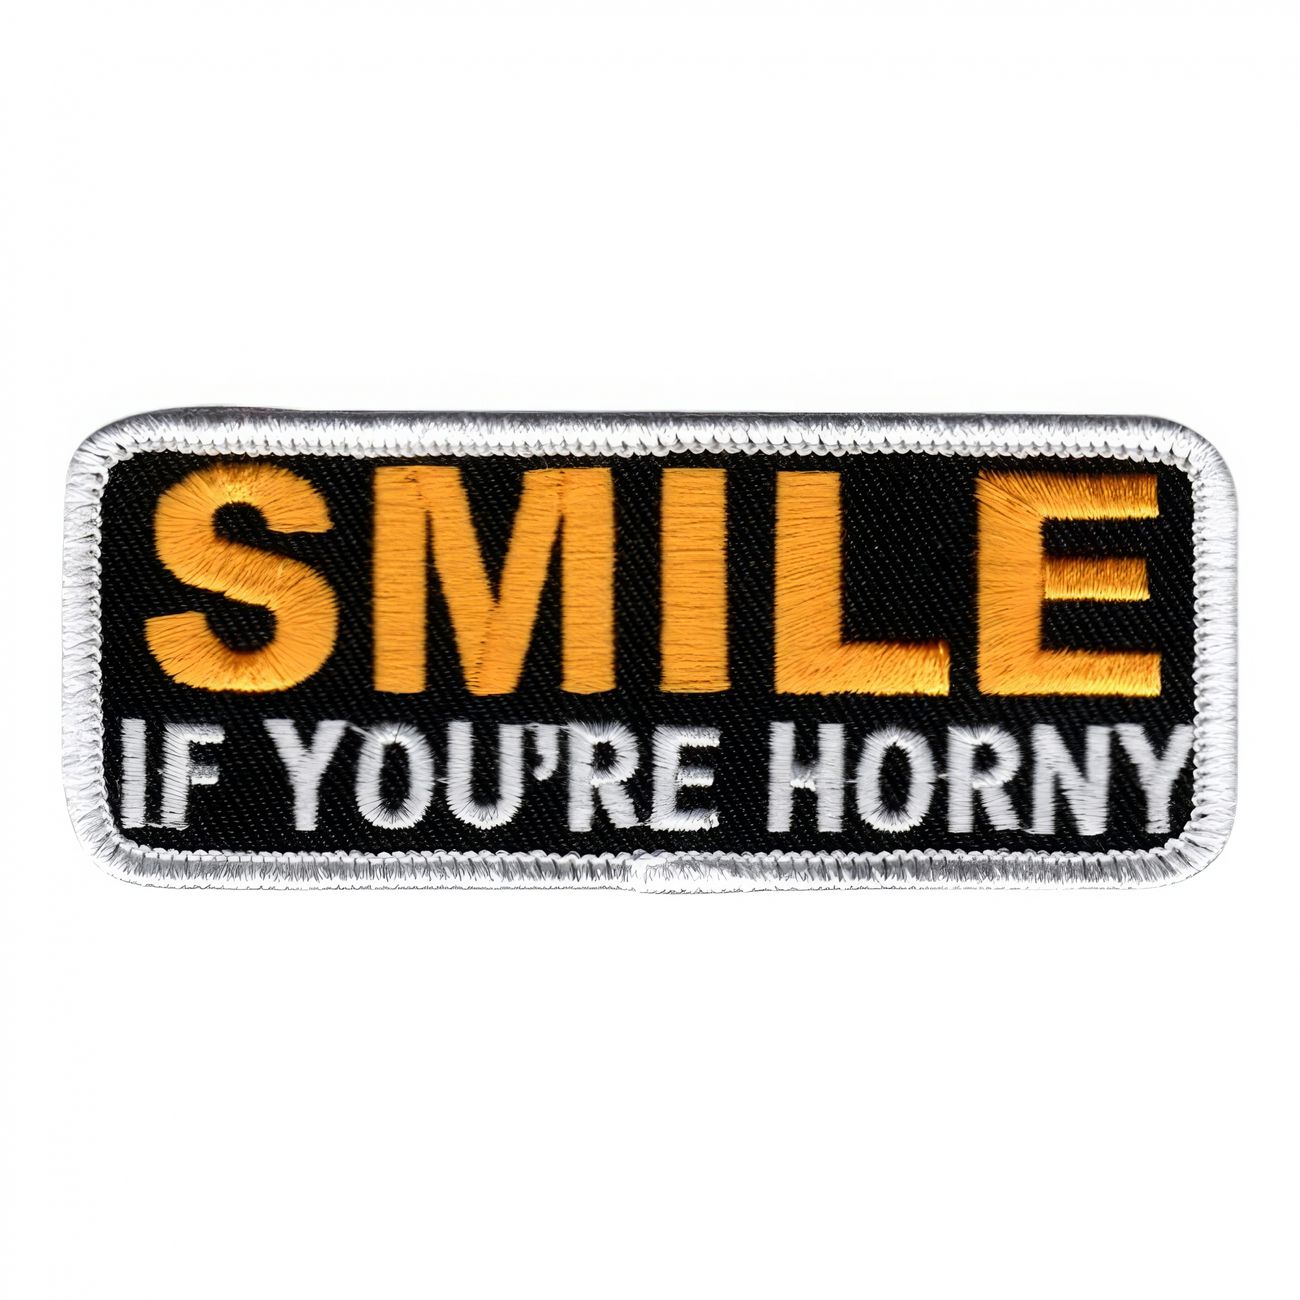 tygmarke-smile-if-youre-horny-a-94390-1